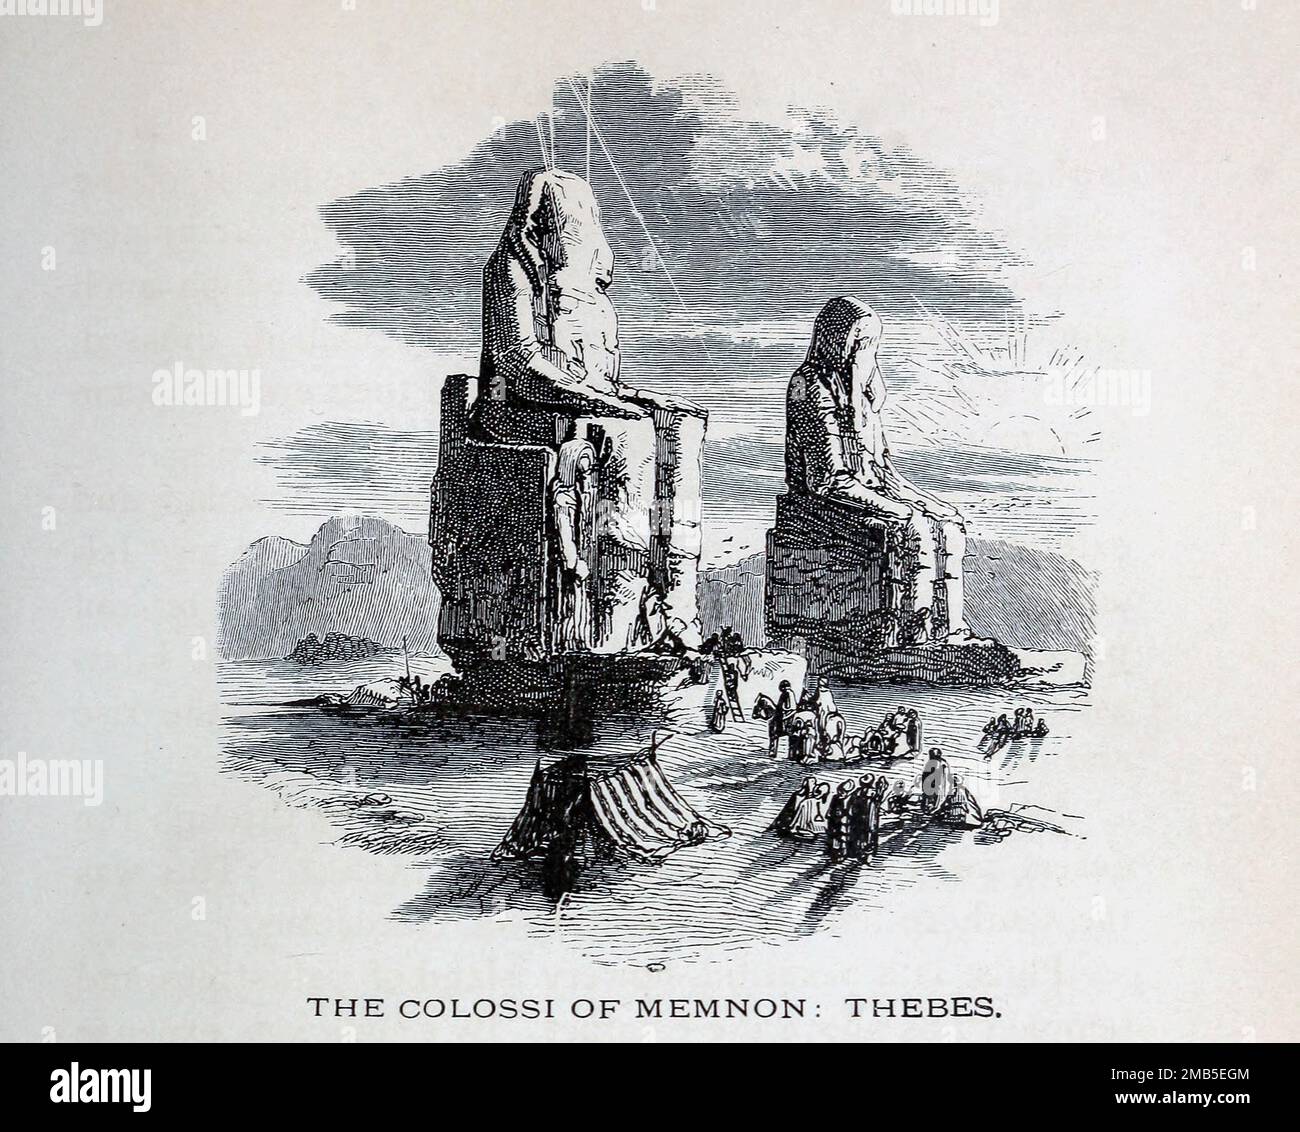 Colossi of Memnon : Thebes engraving from the book ' Through Bible lands : notes of travel in Egypt, the desert, and Palestine ' by Philip Schaff, 1819-1893 Publisher New York : American Tract Society 1878 Stock Photo